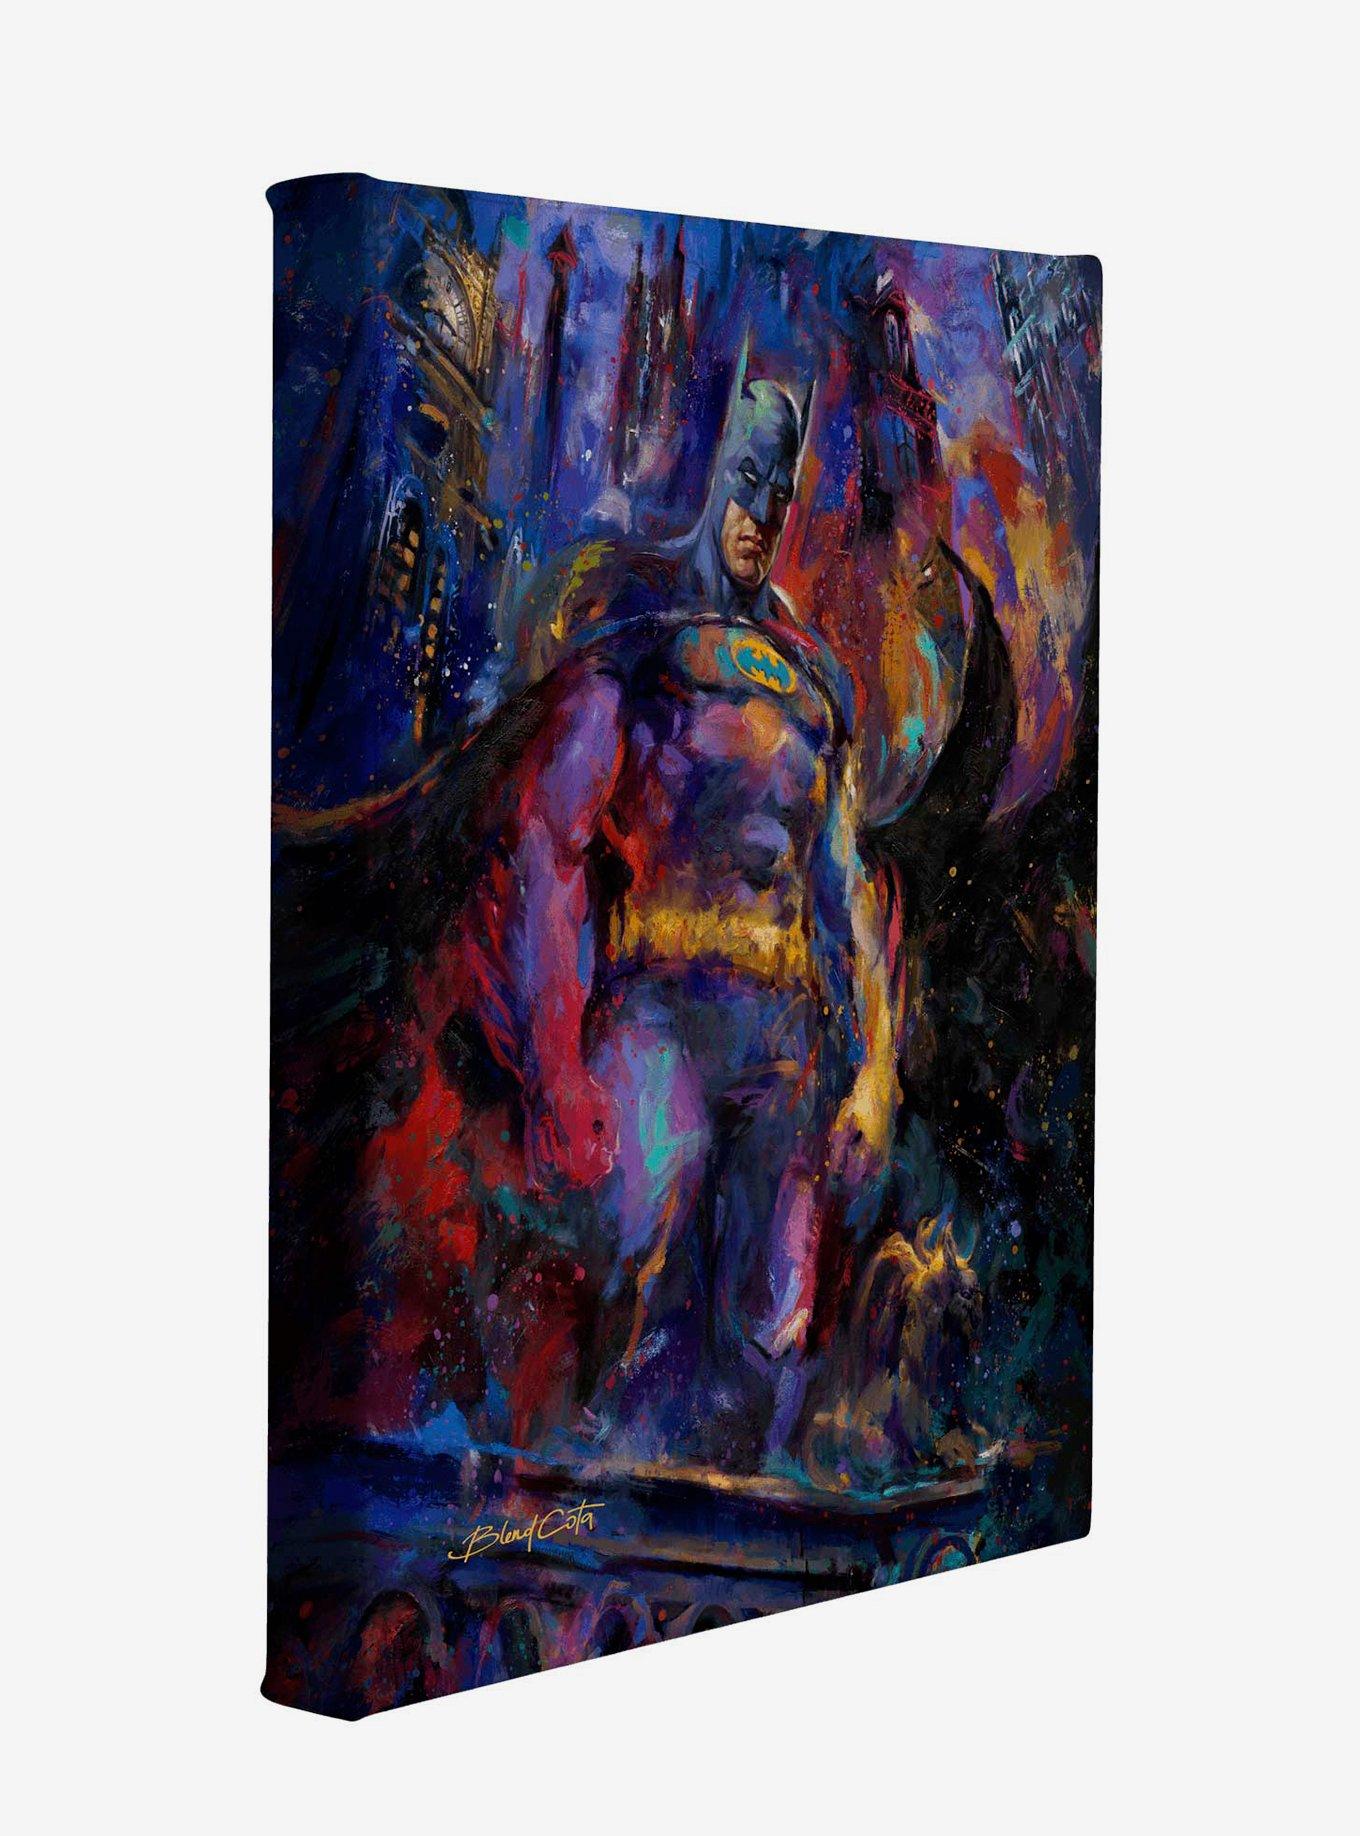 DC Comics The Dark Knight 14" x 11" Gallery Wrapped Canvas 